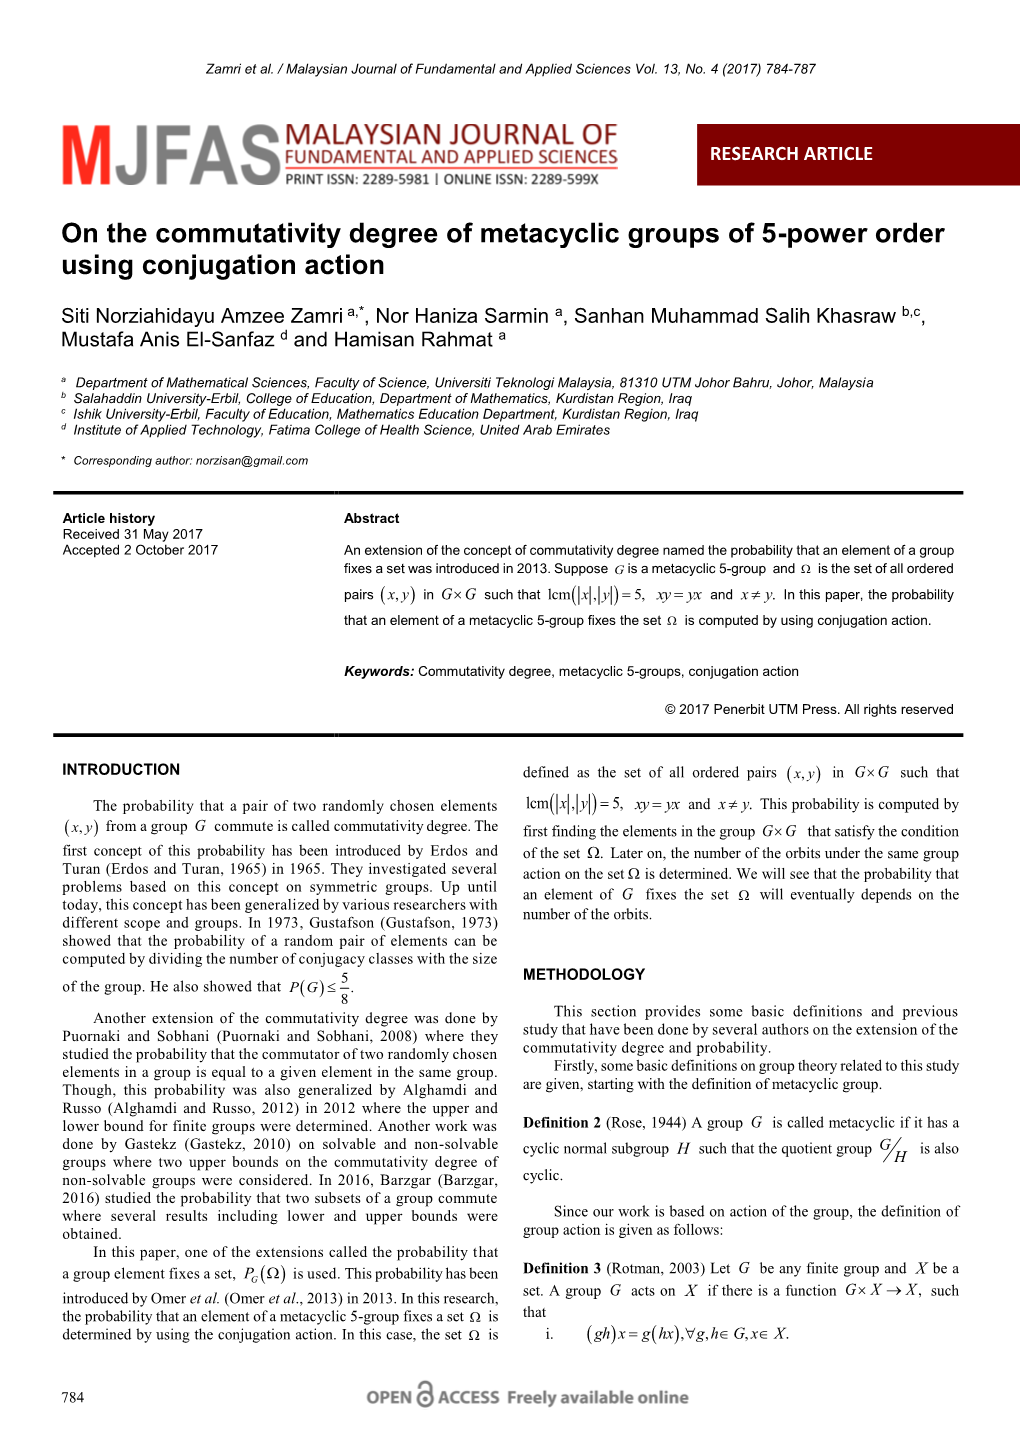 On the Commutativity Degree of Metacyclic Groups of 5-Power Order Using Conjugation Action